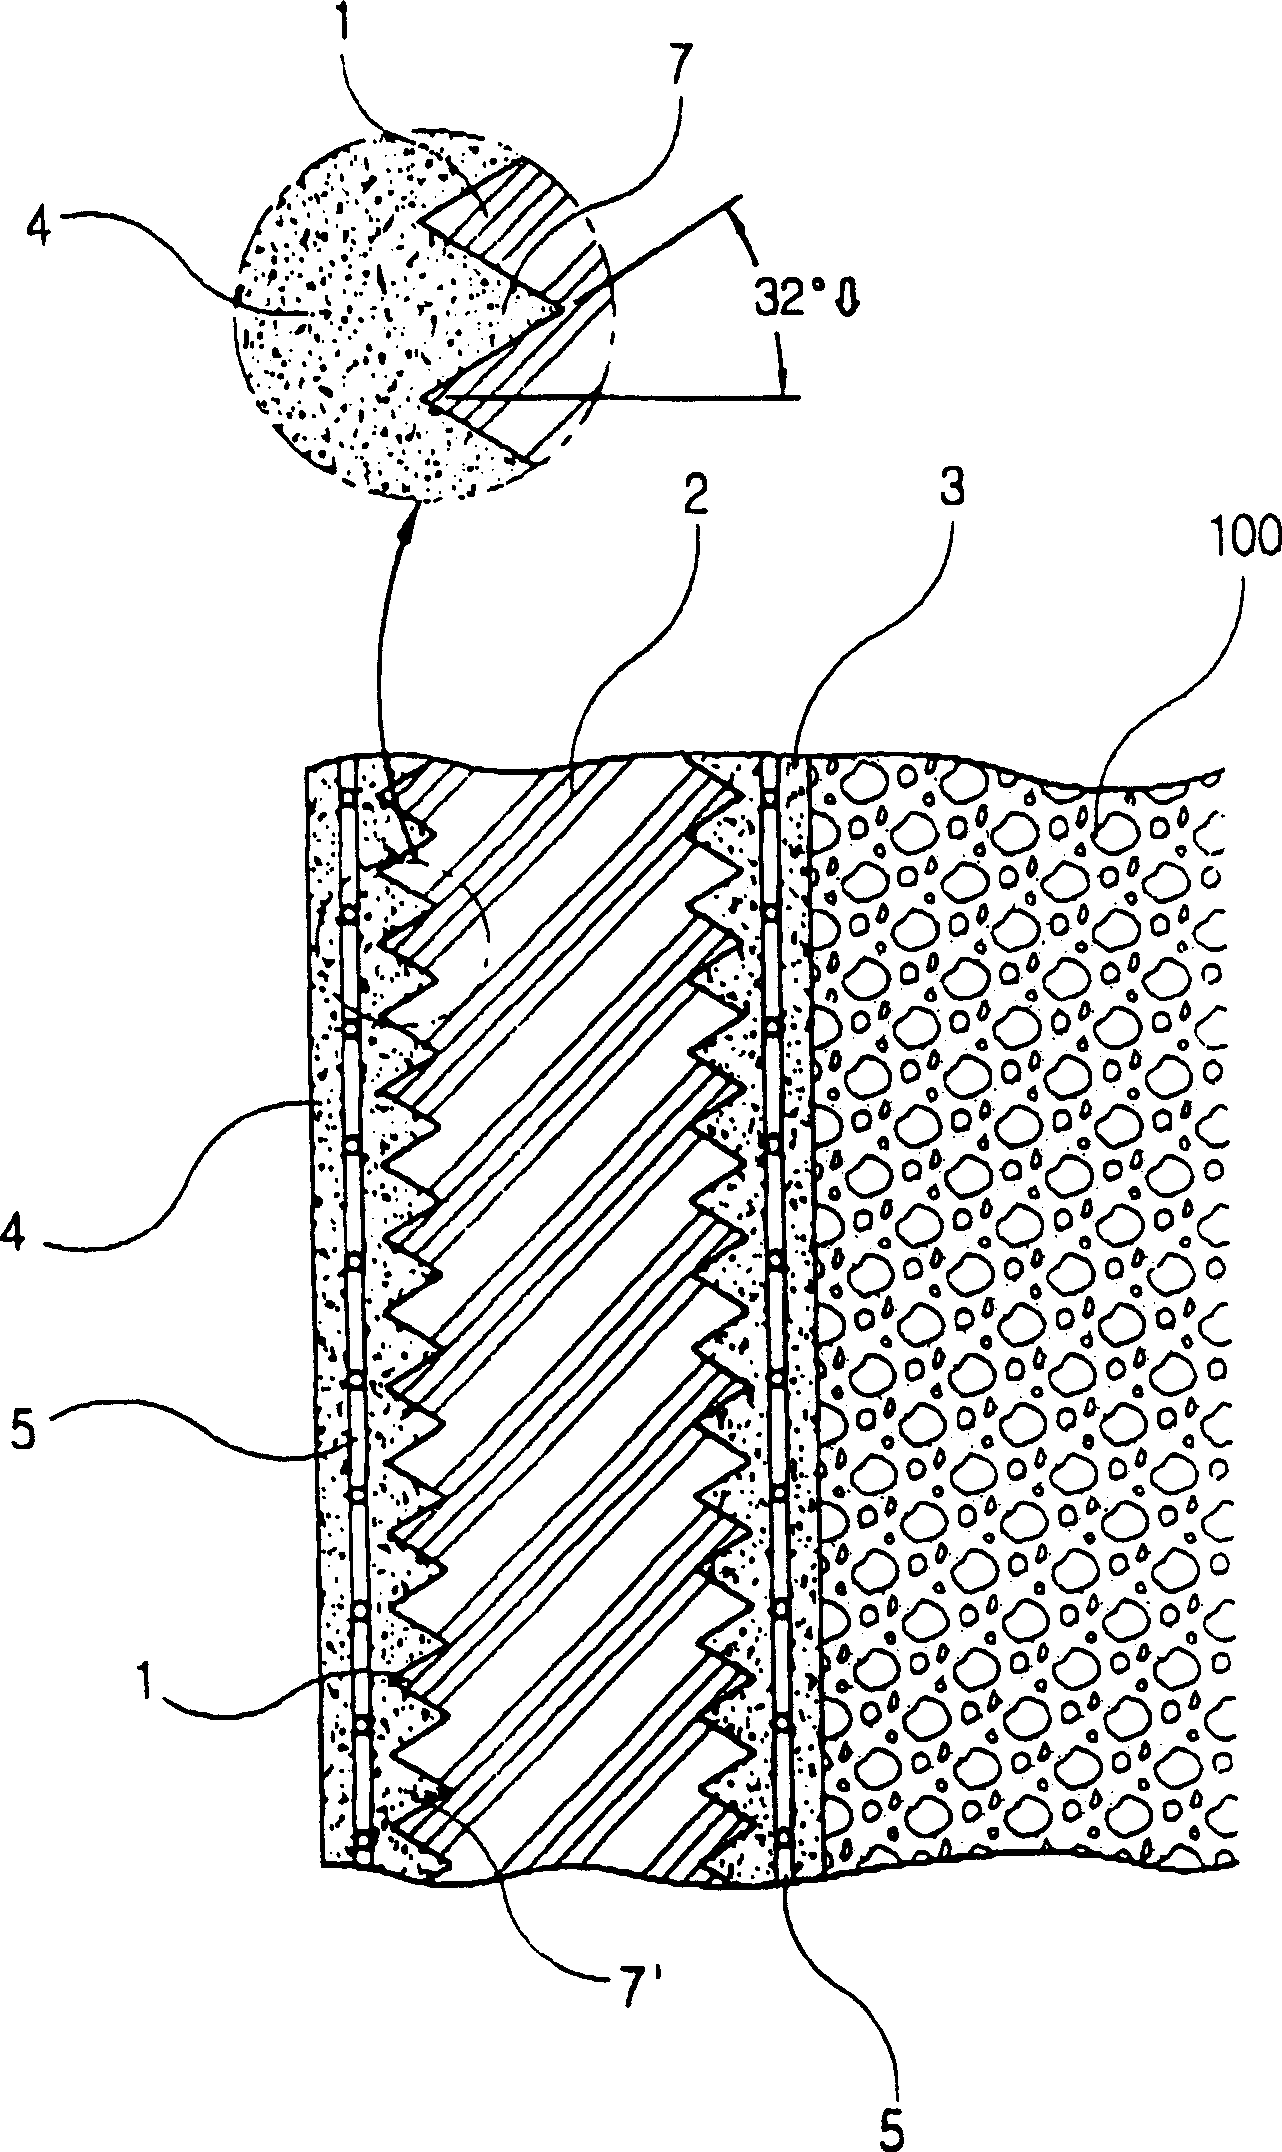 Construction structure of heat- and sound-insulation wall using mortar